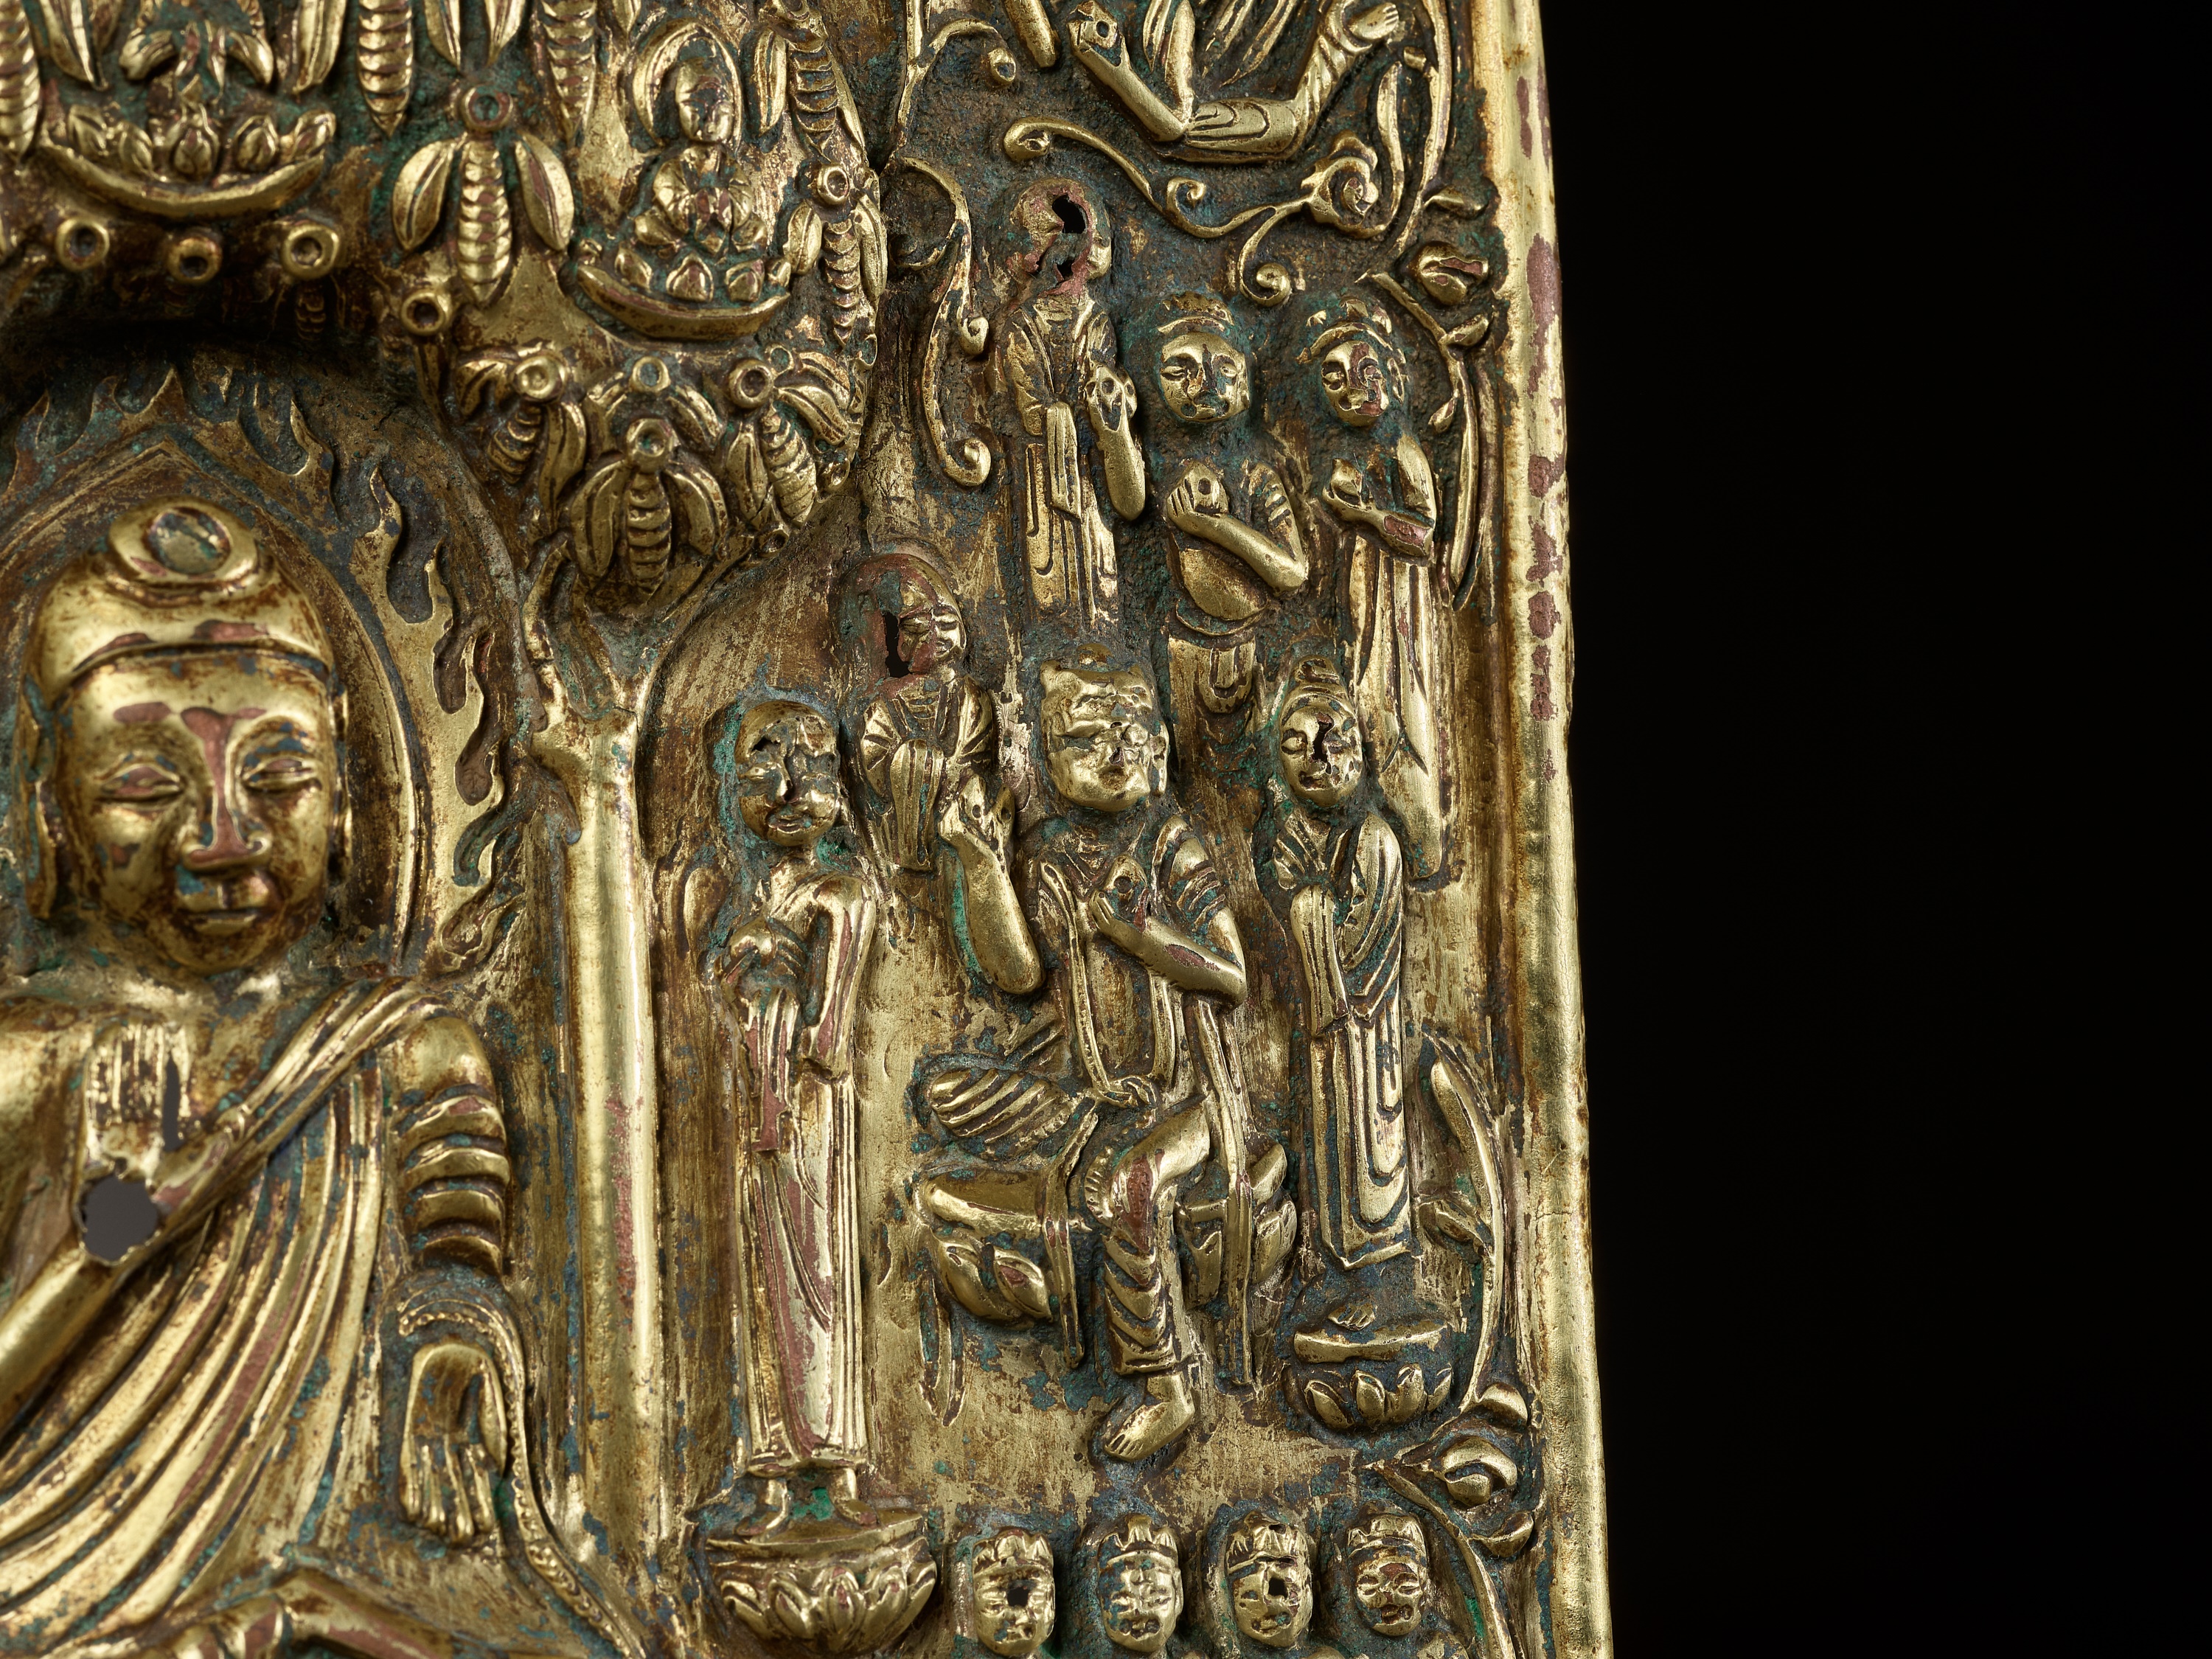 A LARGE AND IMPORTANT BUDDHIST VOTIVE PLAQUE, GILT COPPER REPOUSSE, EARLY TANG DYNASTY - Image 17 of 21